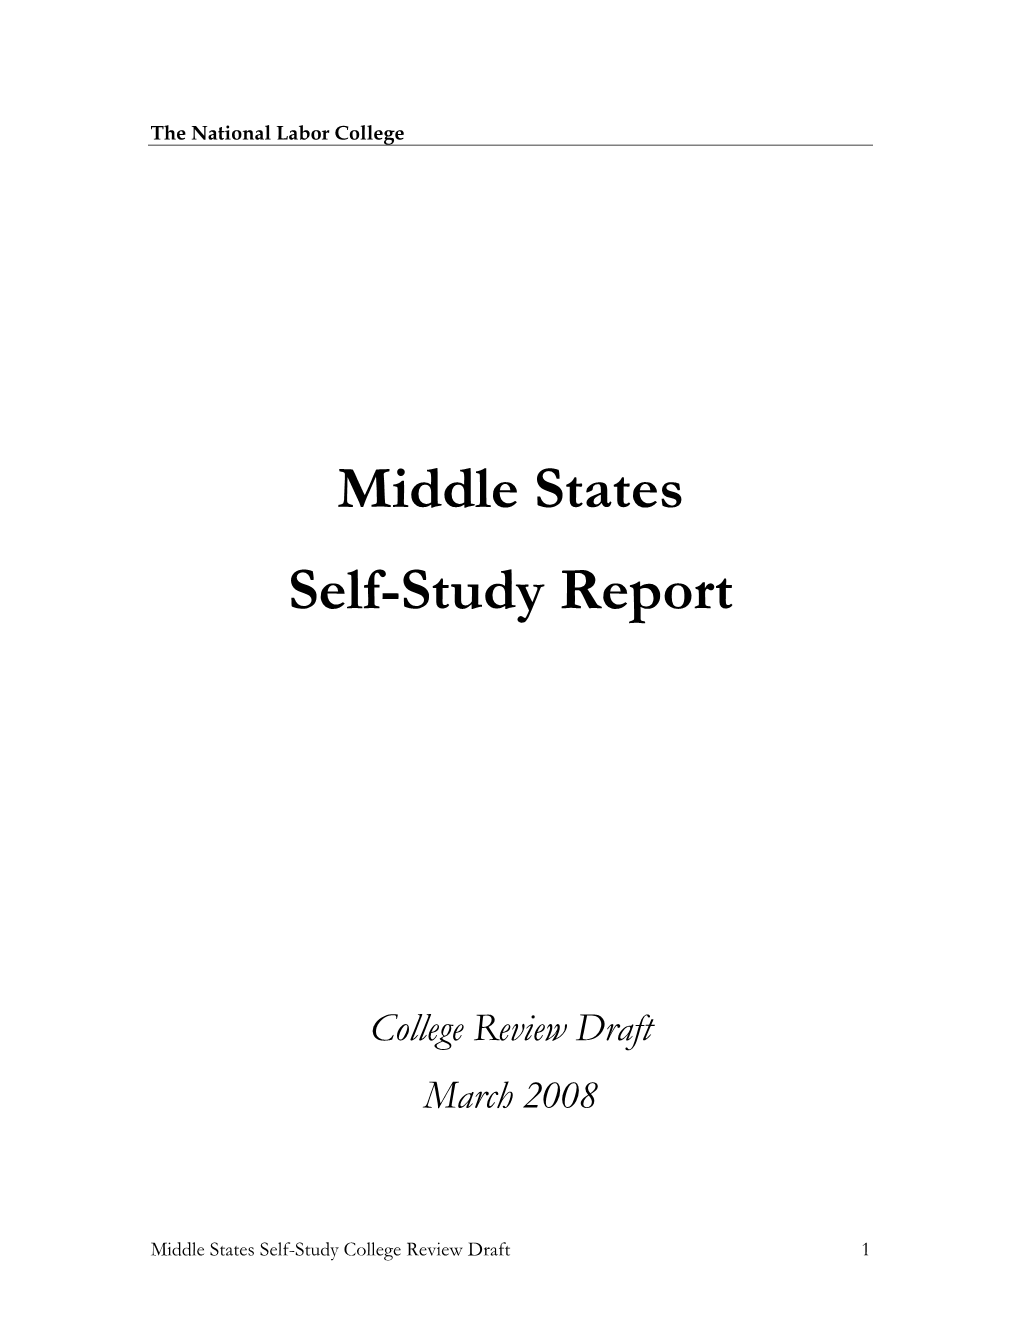 Middle States Self-Study Report